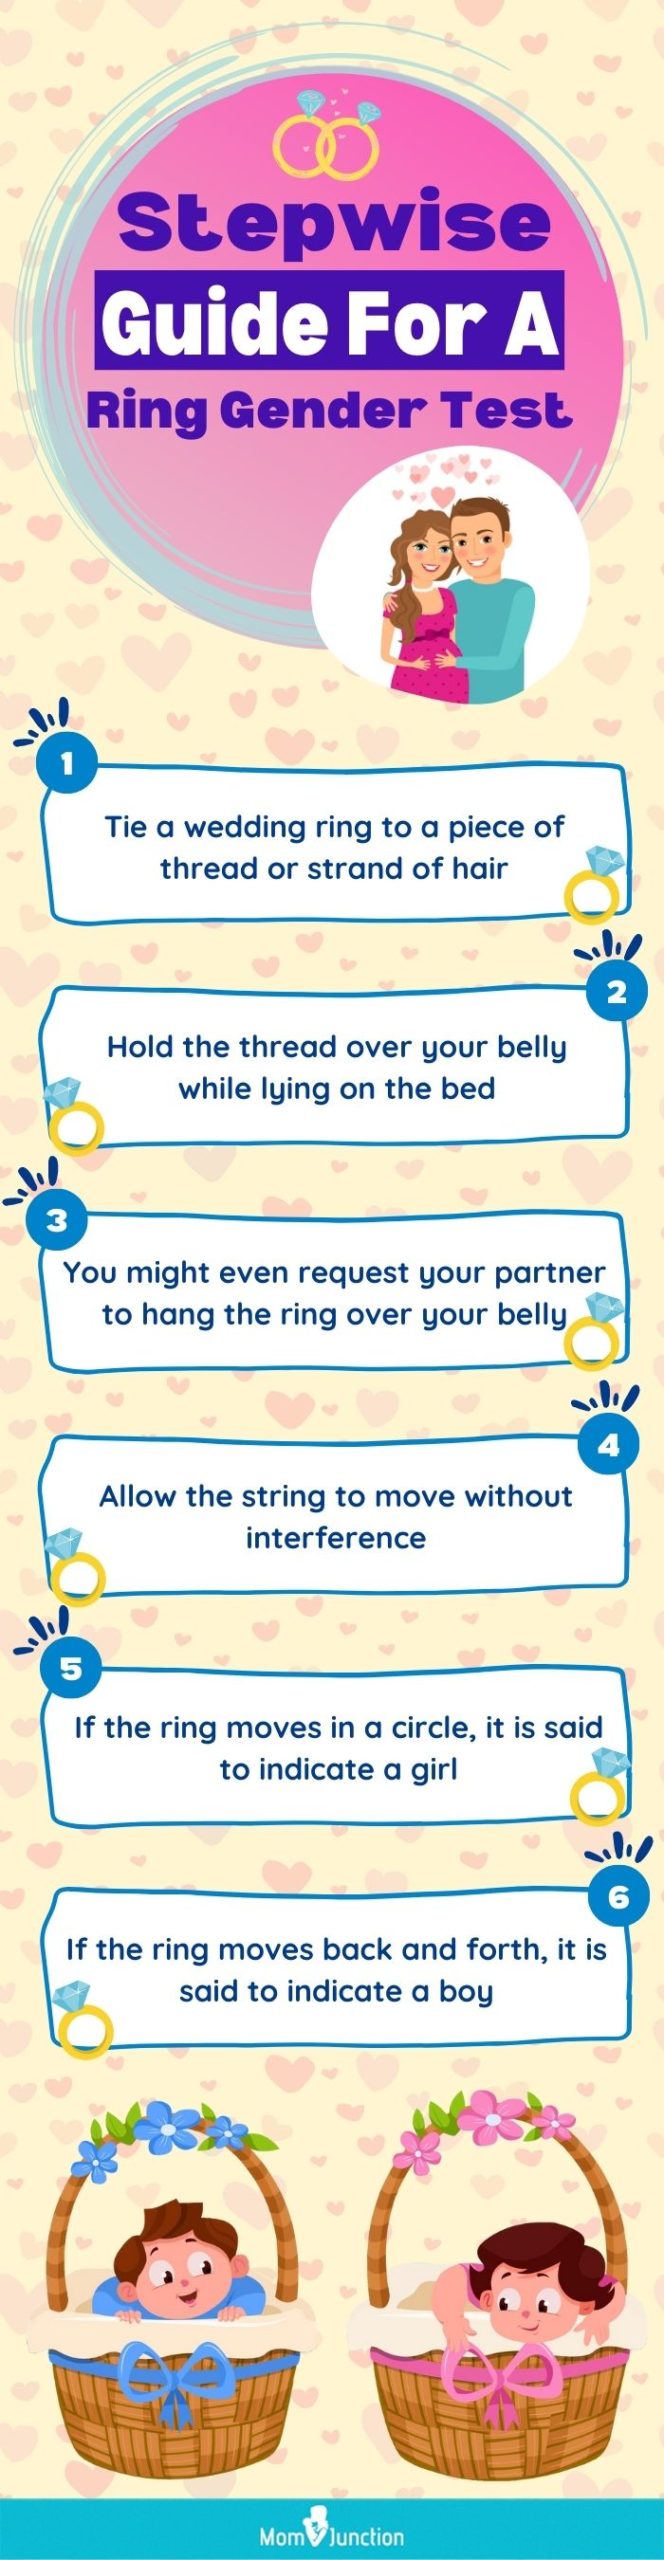 stepwise guide for a ring gender test (infographic)